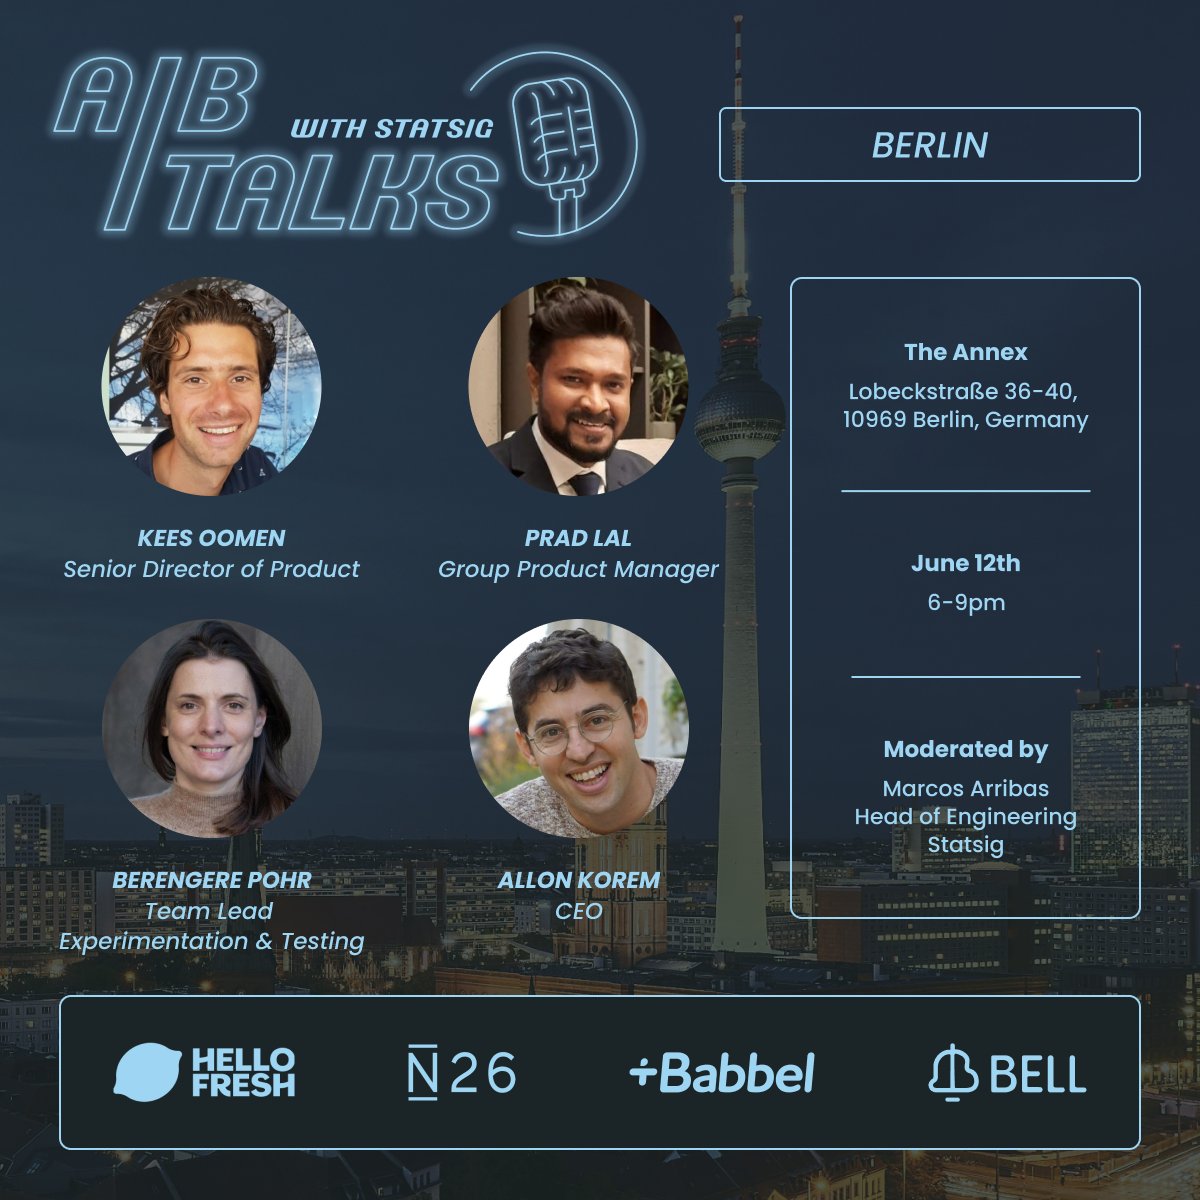 Berlin, du bist so wunderbar - we've added a new speaker to our A/B Talks Berlin meetup 🇩🇪

Introducing the Team Lead of Experimentation and Testing at @babbel! 

Also includes @HelloFresh, @n26, and Bell Statistics

eventbrite.com/e/ab-talks-ber…

#abtalks #techmeetup #abtesting